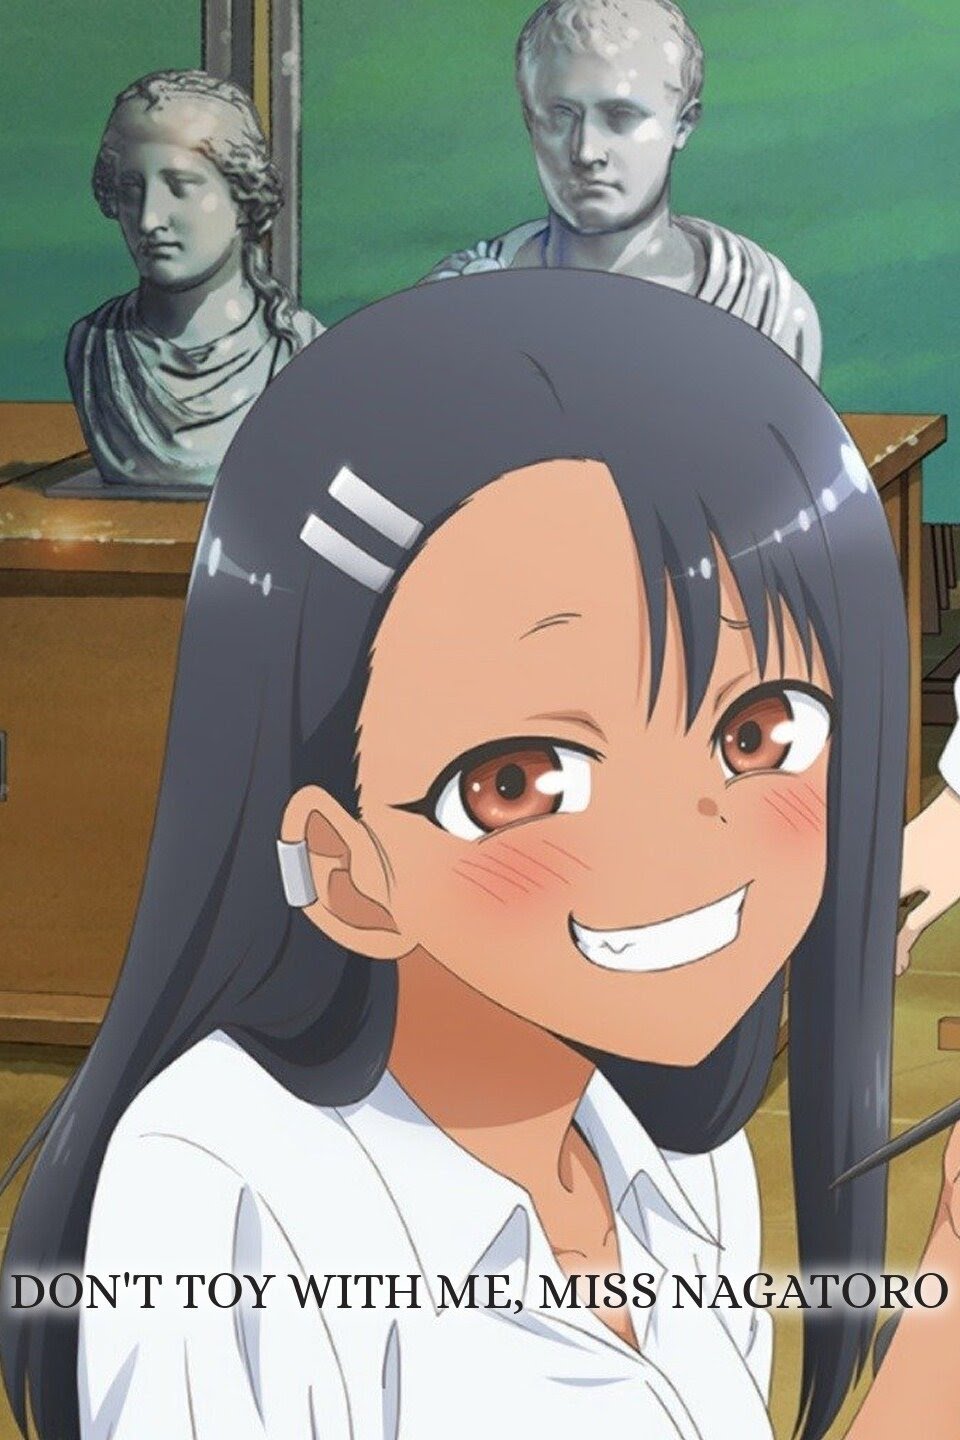 DON'T TOY WITH ME, MISS NAGATORO (Spanish Dub) You're All Red, Senpai /  Senpai, You Could Be a Little More - Watch on Crunchyroll